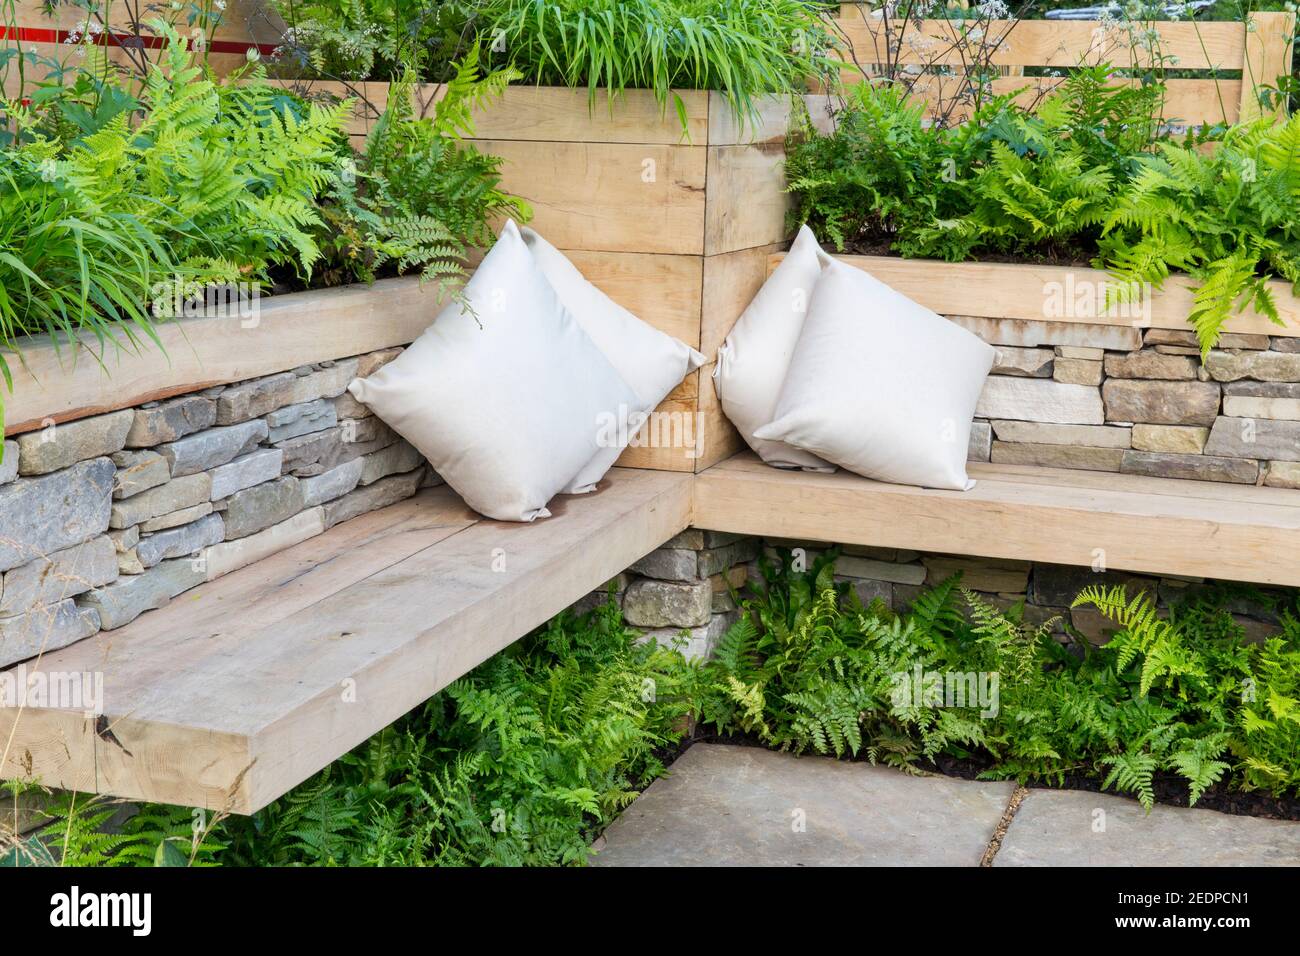 A wooden bench with cushions in a corner seating area and dry stone wall raised beds with ferns and Hosta plants growing England GB UK Stock Photo